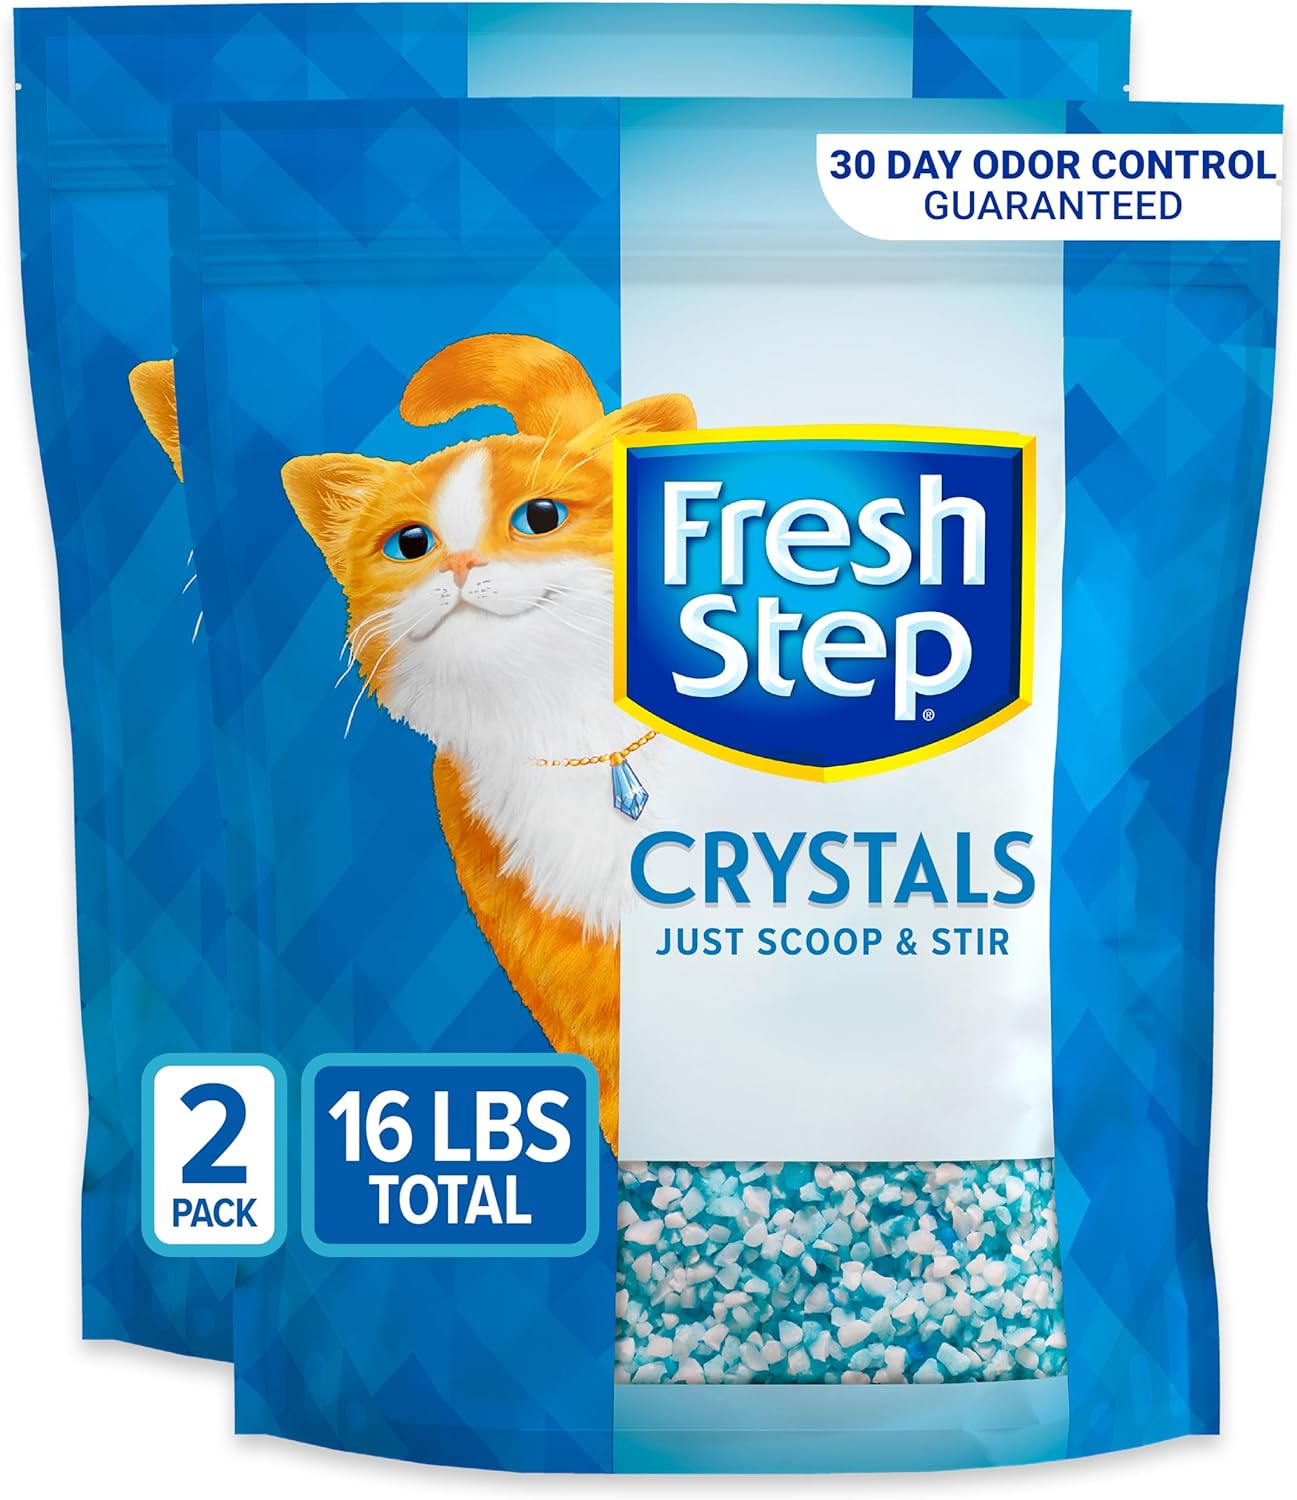 Fresh Step Crystals, Premium Cat Litter, Scented, 8 Pounds (Pack of 2) $16.19